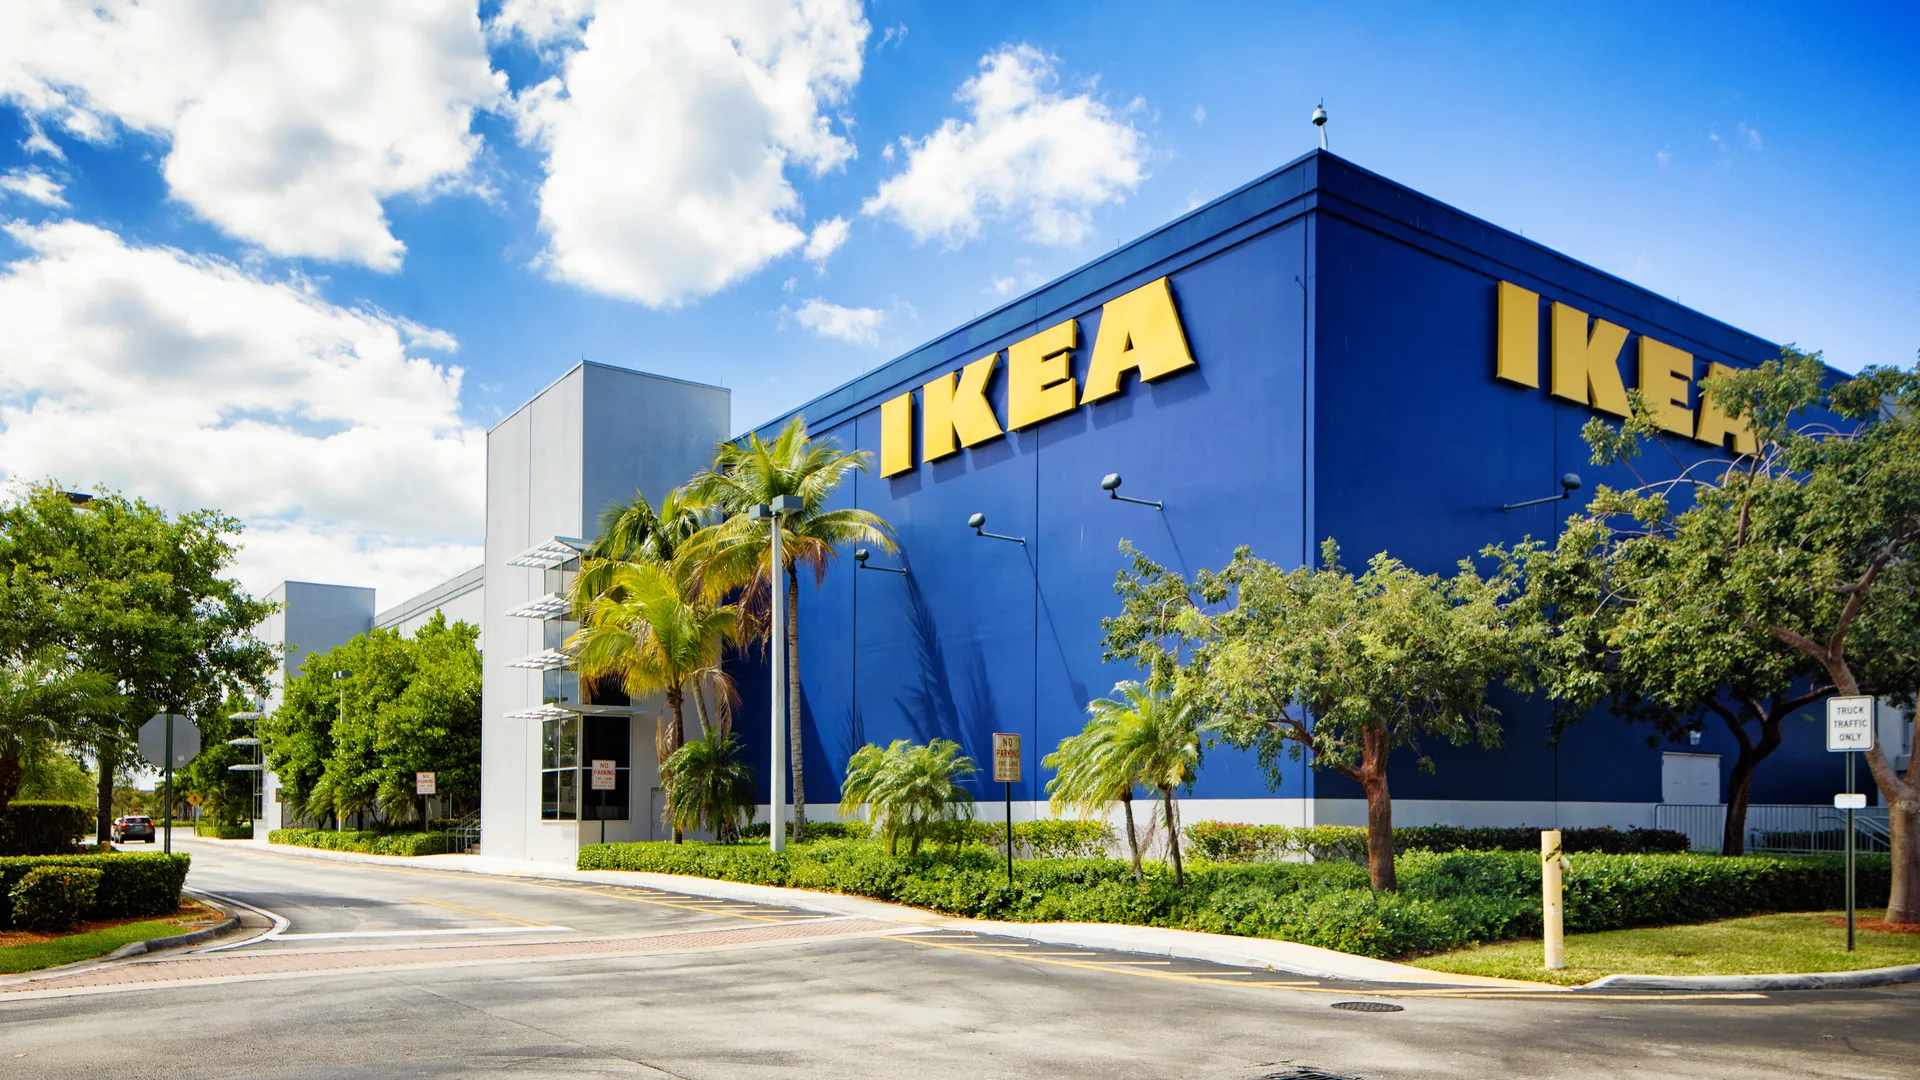 Corner view of the Ikea furniture store in Sunrise Florida near Fort Lauderdale on a mostly sunny Winter day.